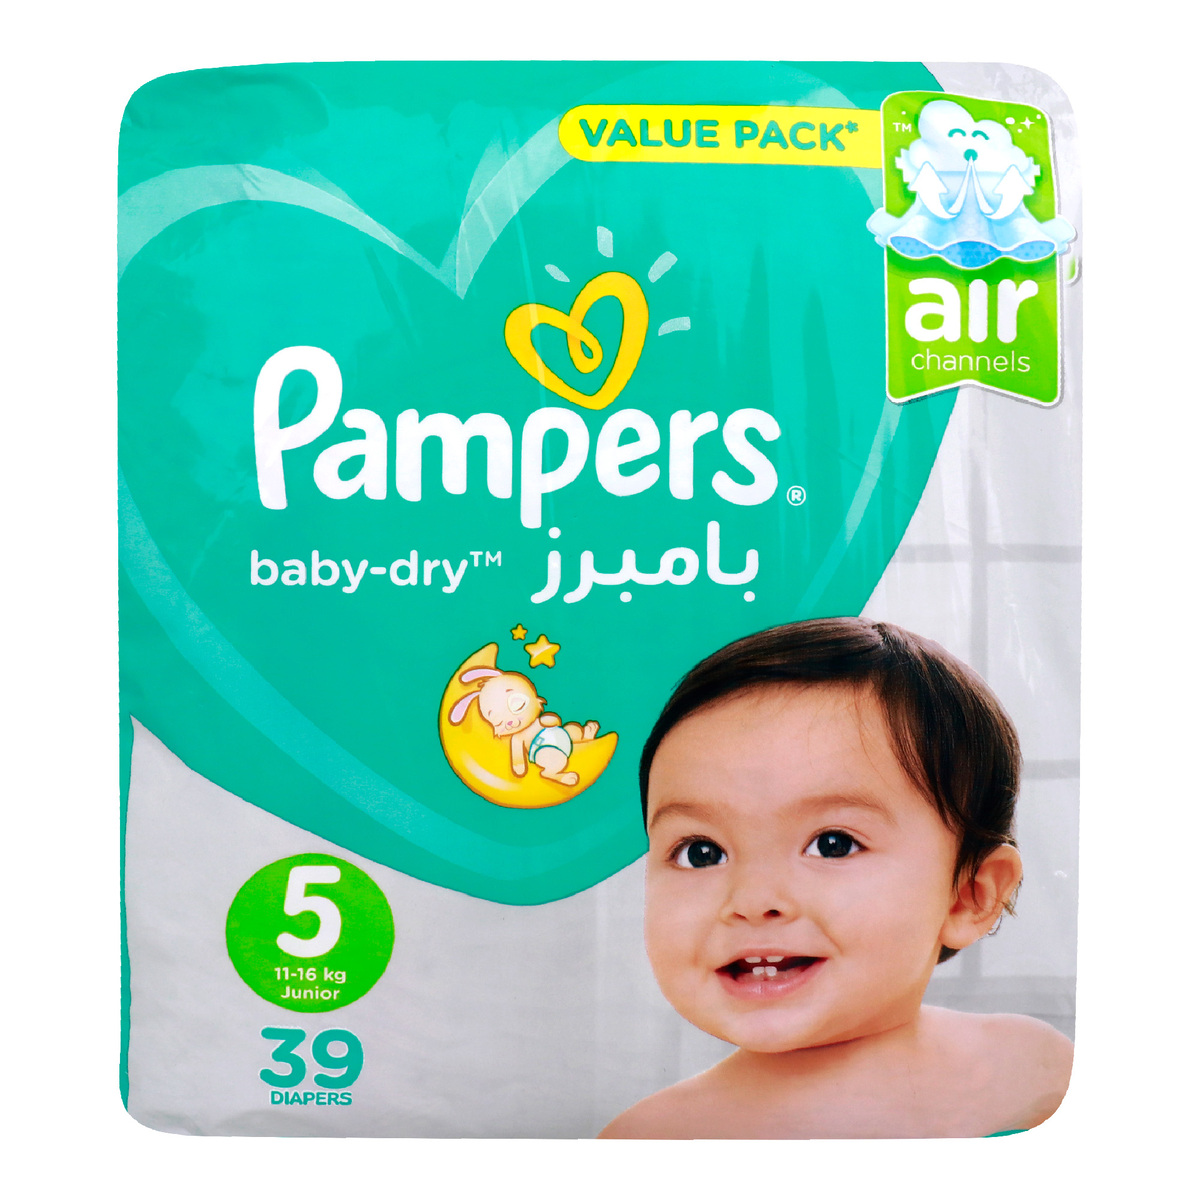 pampers active baby 5 od 19.11